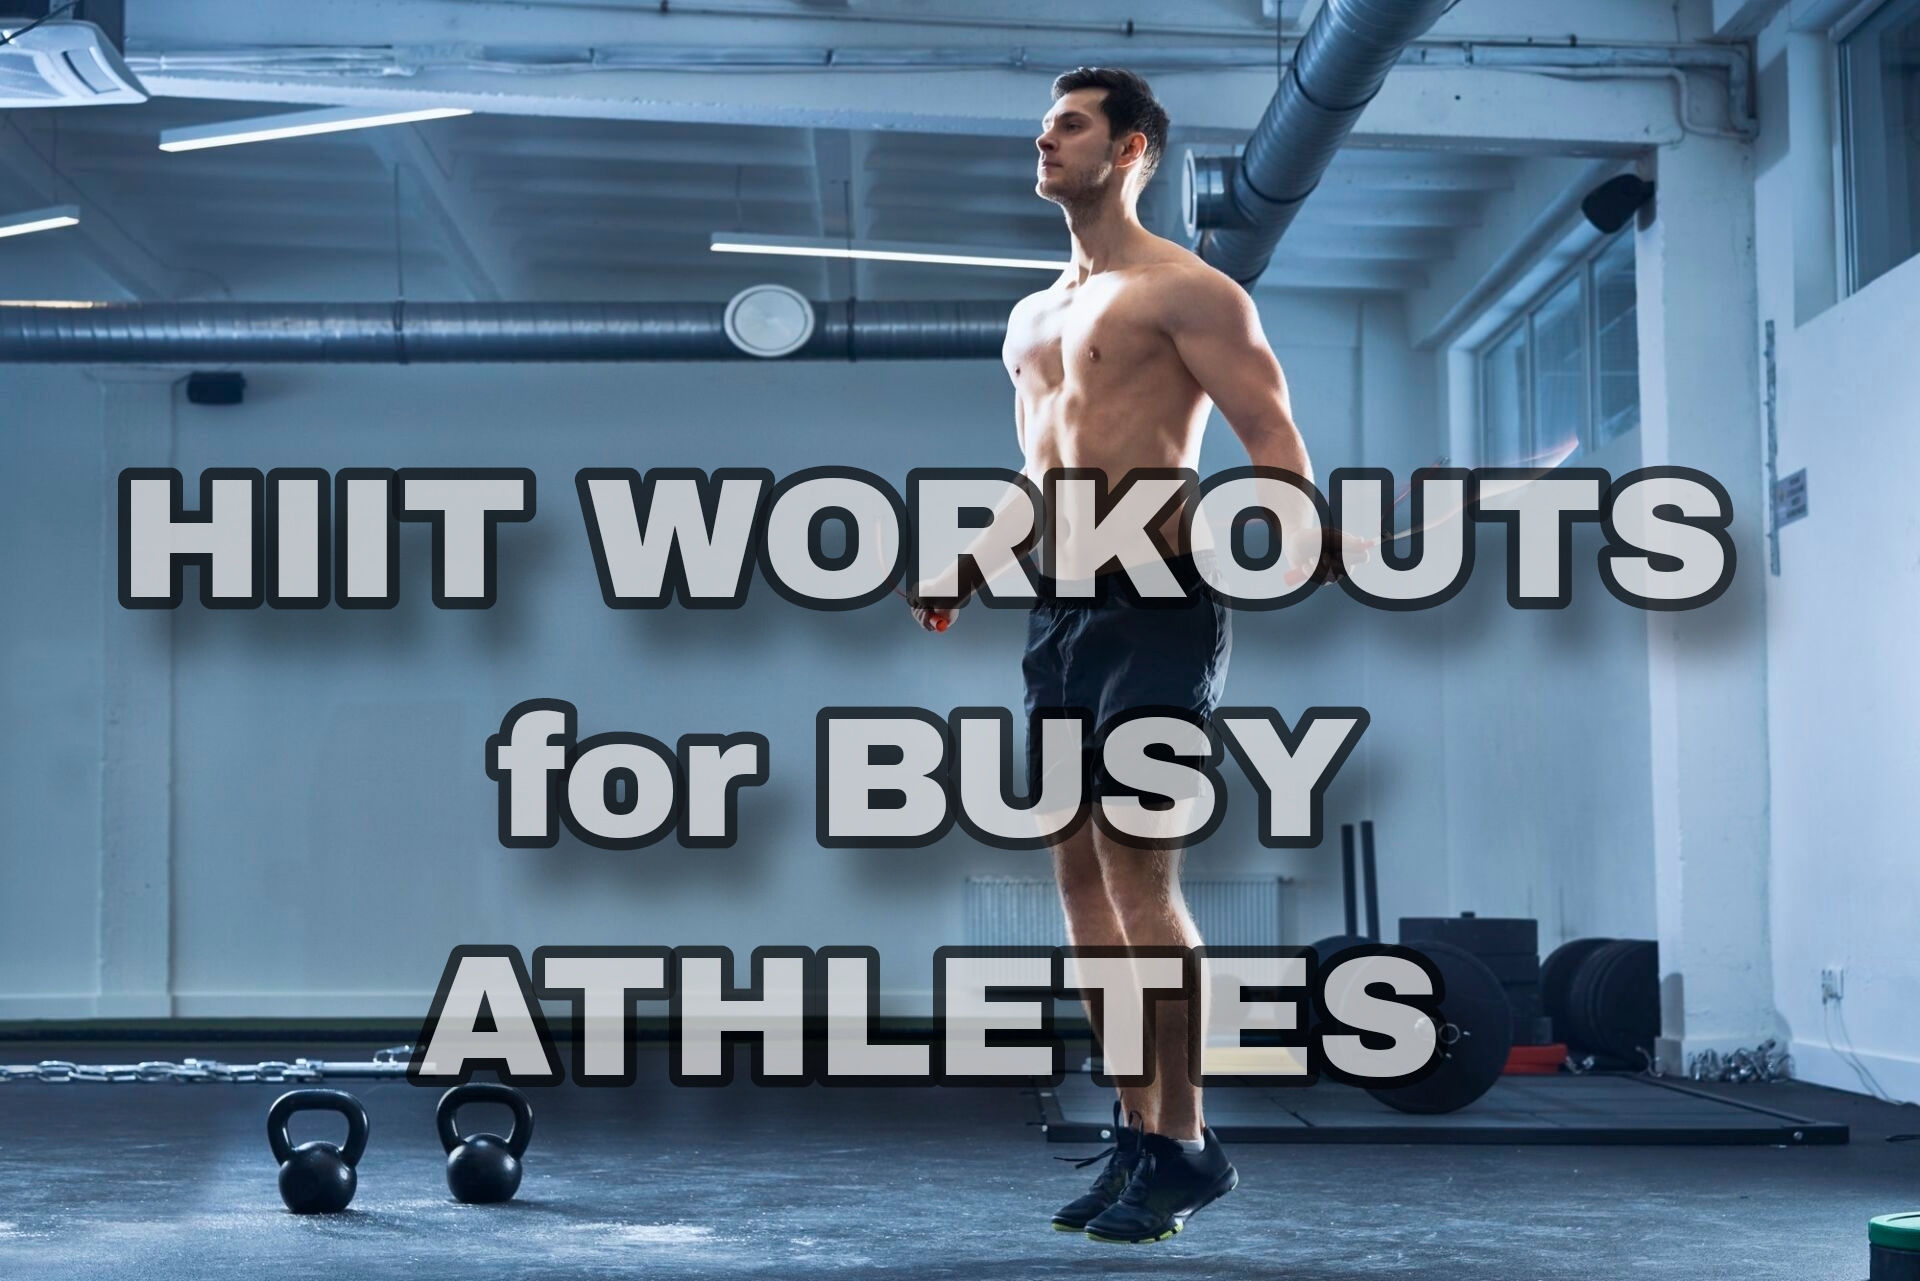 hiit workouts for busy athletes , HIIT